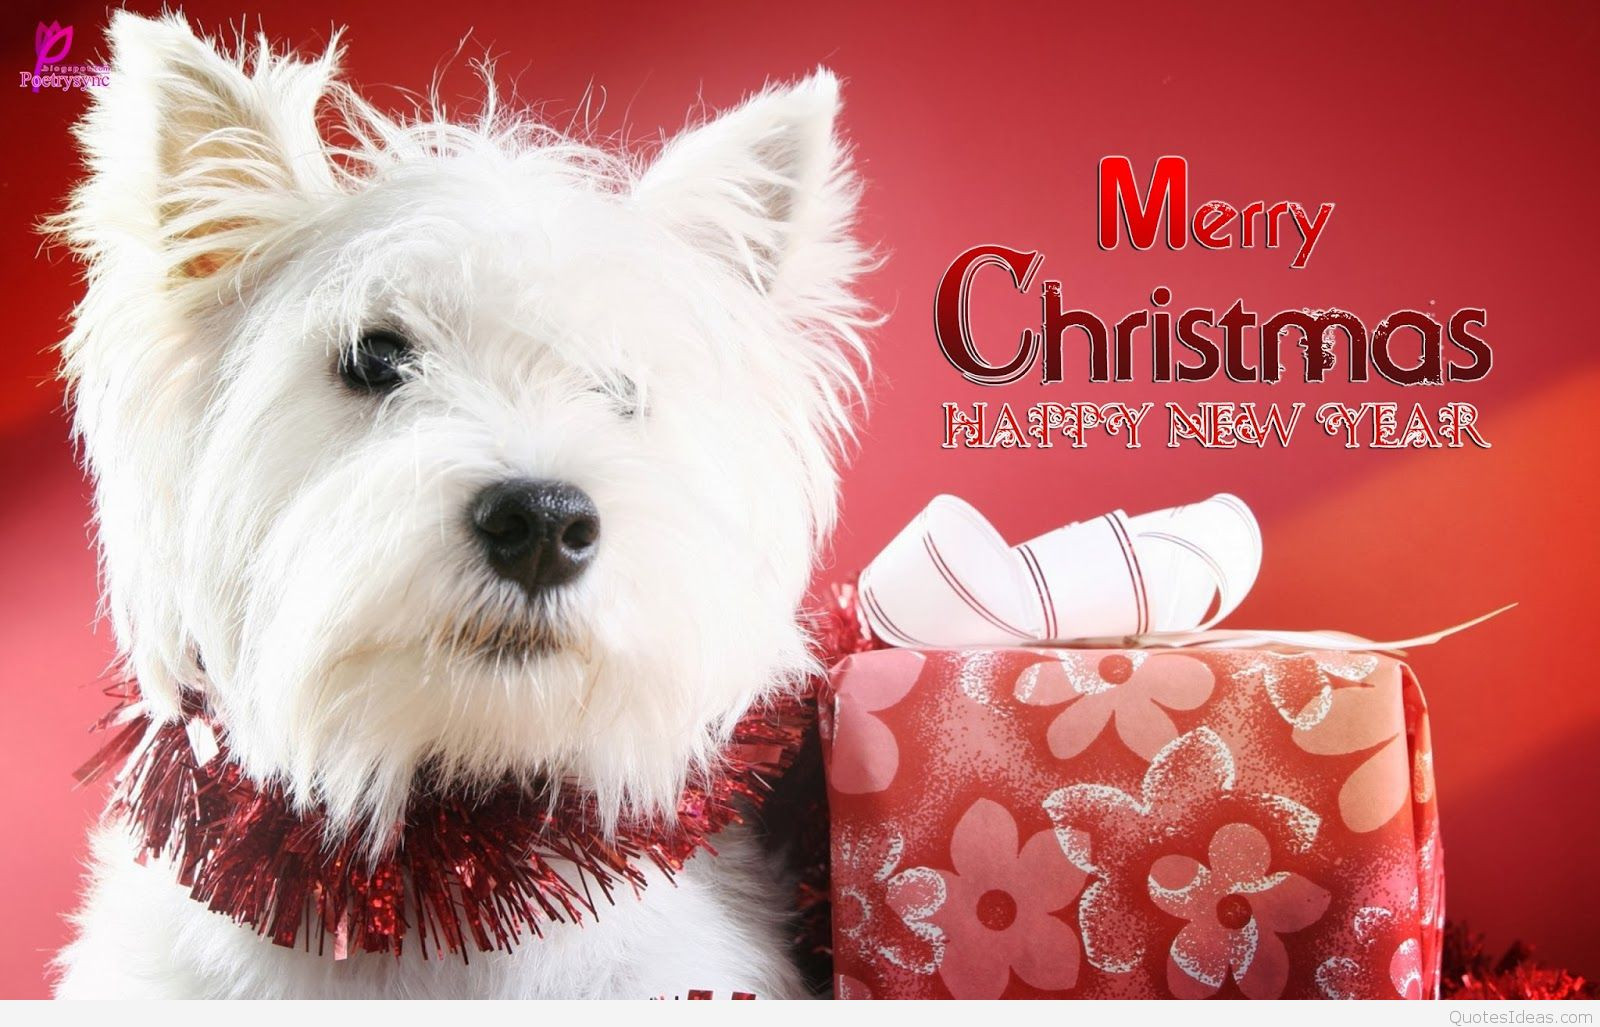 Dog Christmas Quotes
 Humorous Merry Christmas Wallpapers Quotes Cards 2015